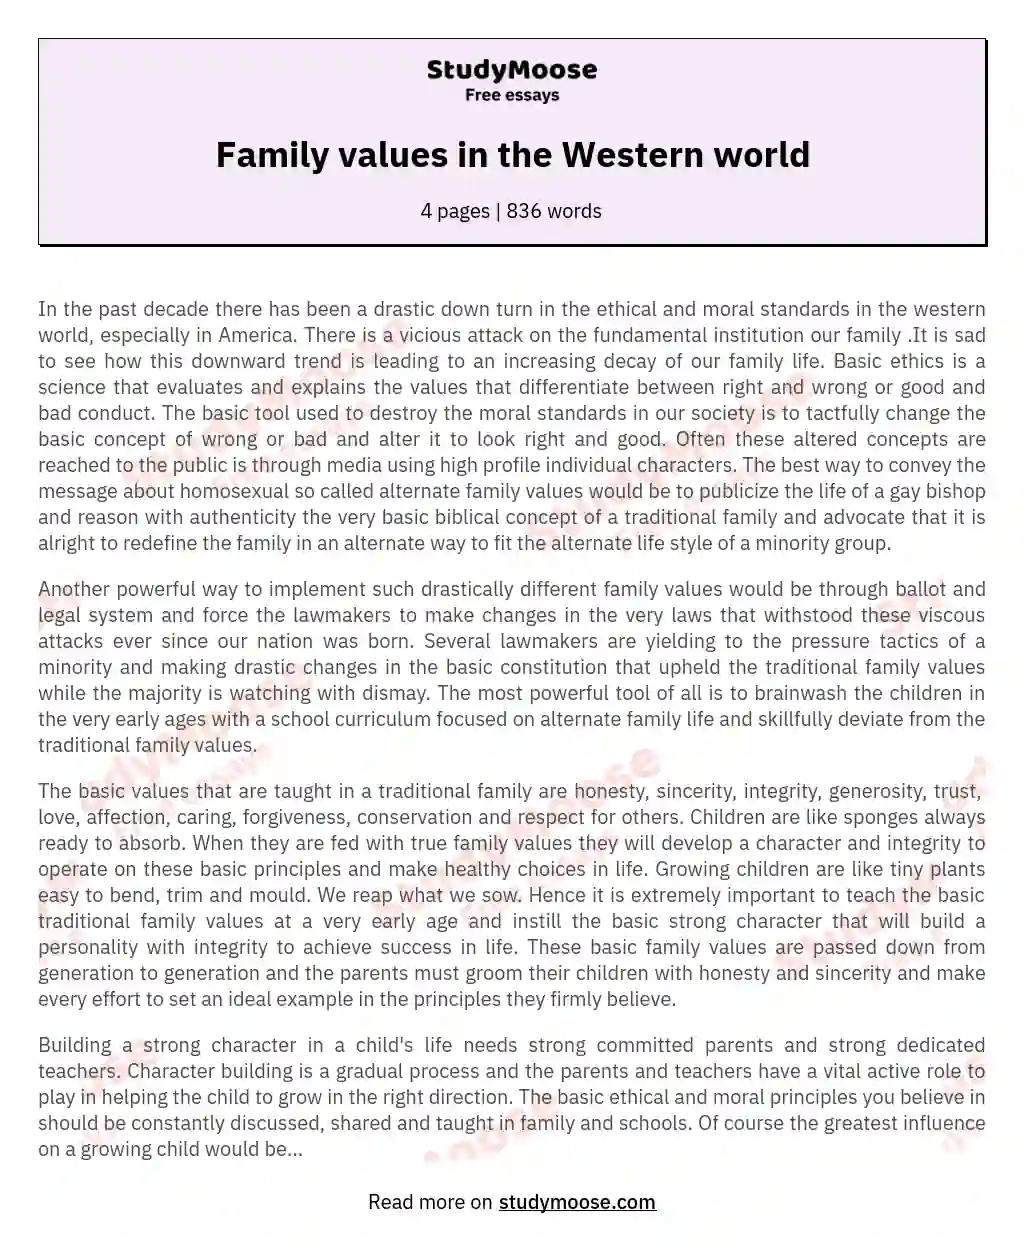 Family values in the Western world essay